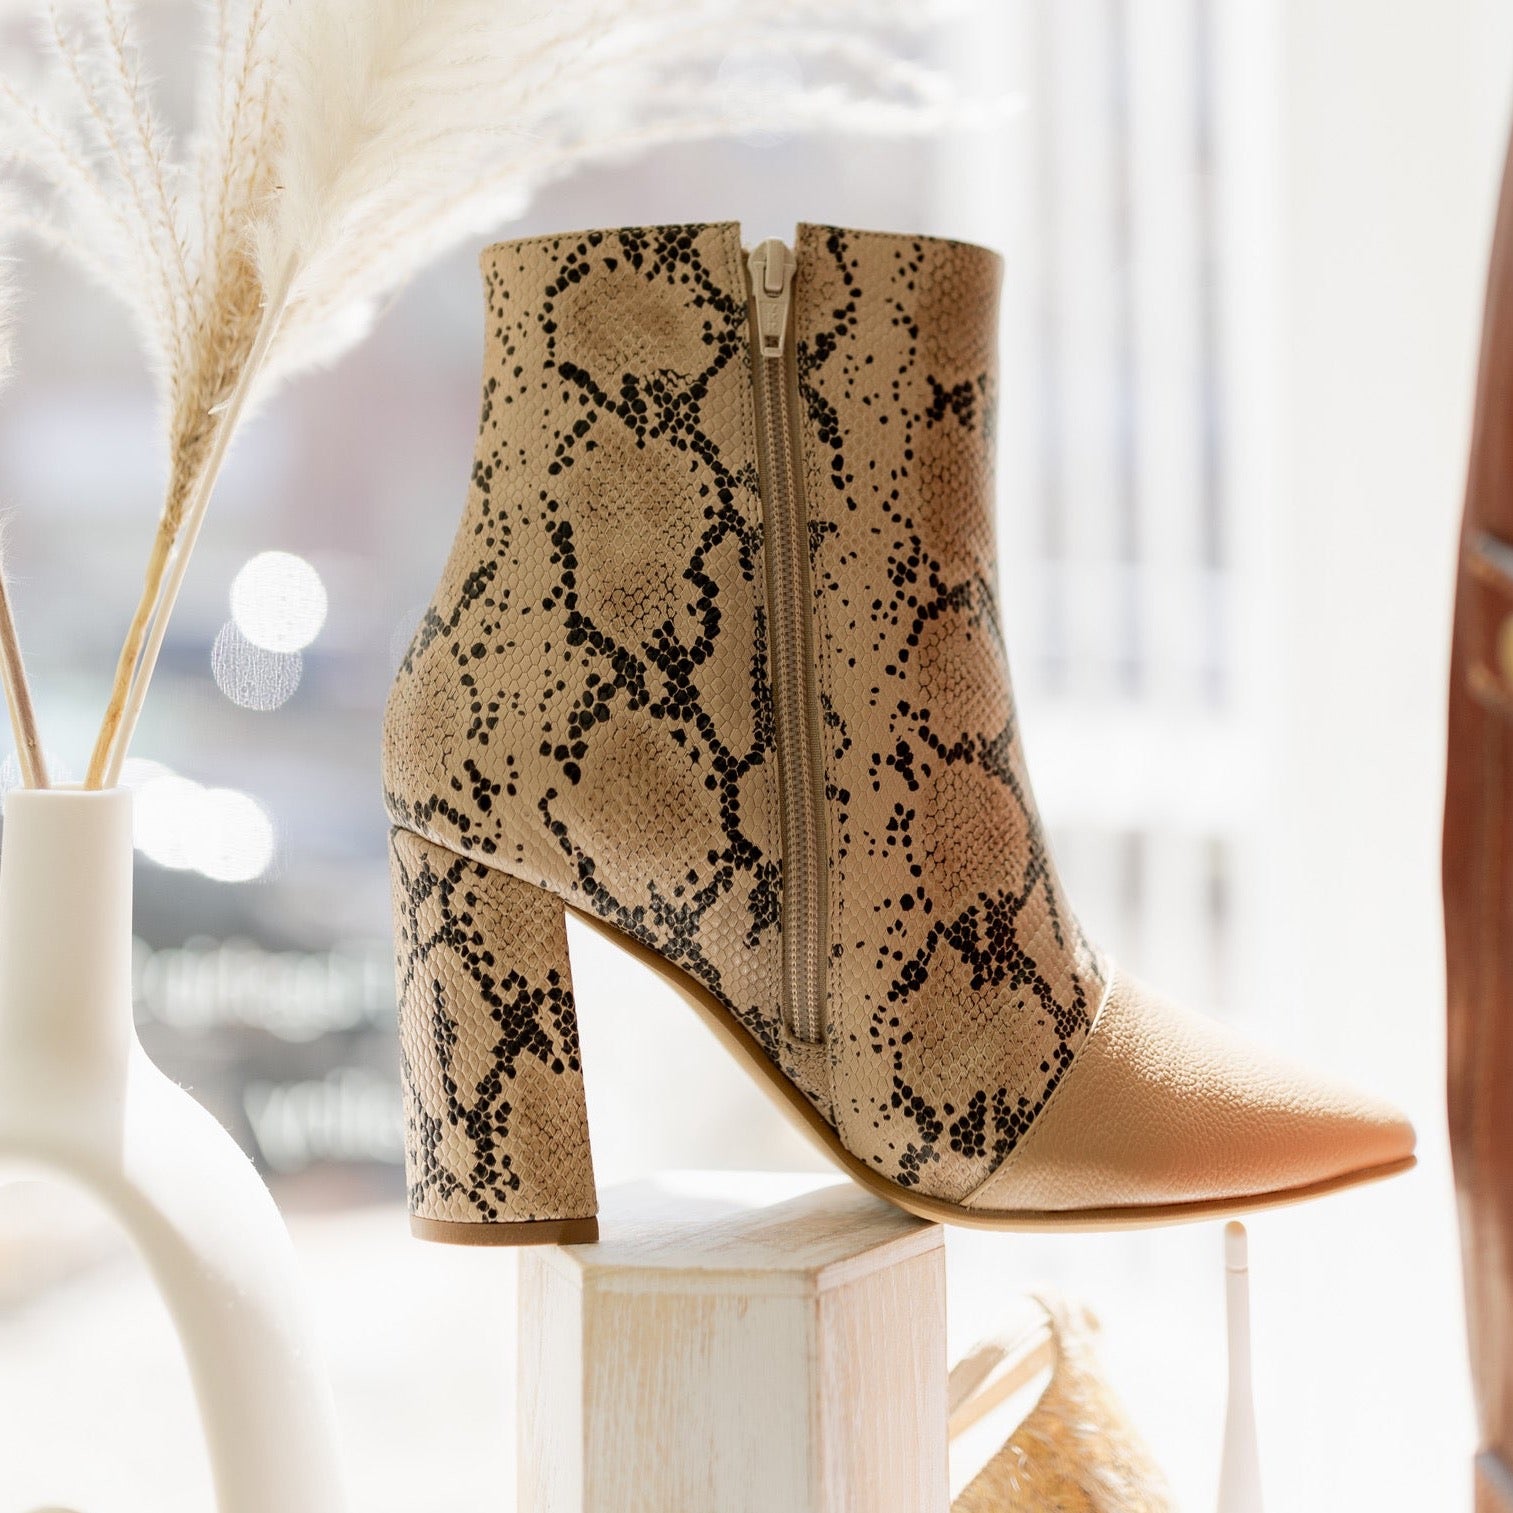 Handcrafted Leather Heeled Boot, Tan Arequipe Smooth Leather and Embossed Leather Sand Snakeskin. Stivali New York